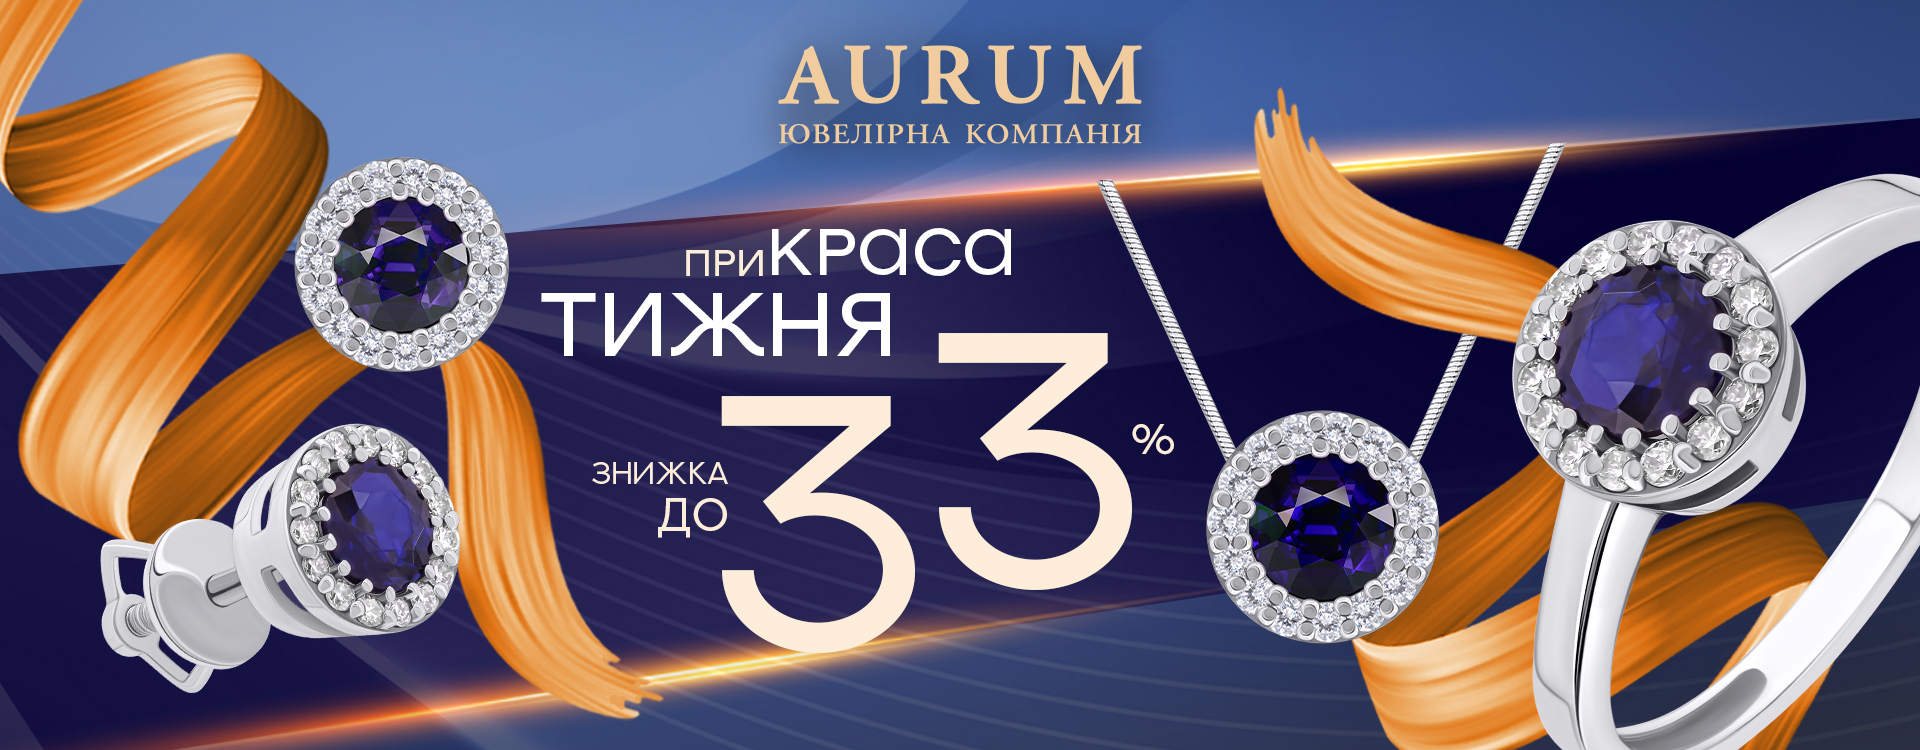 Holiday offers from AURUM